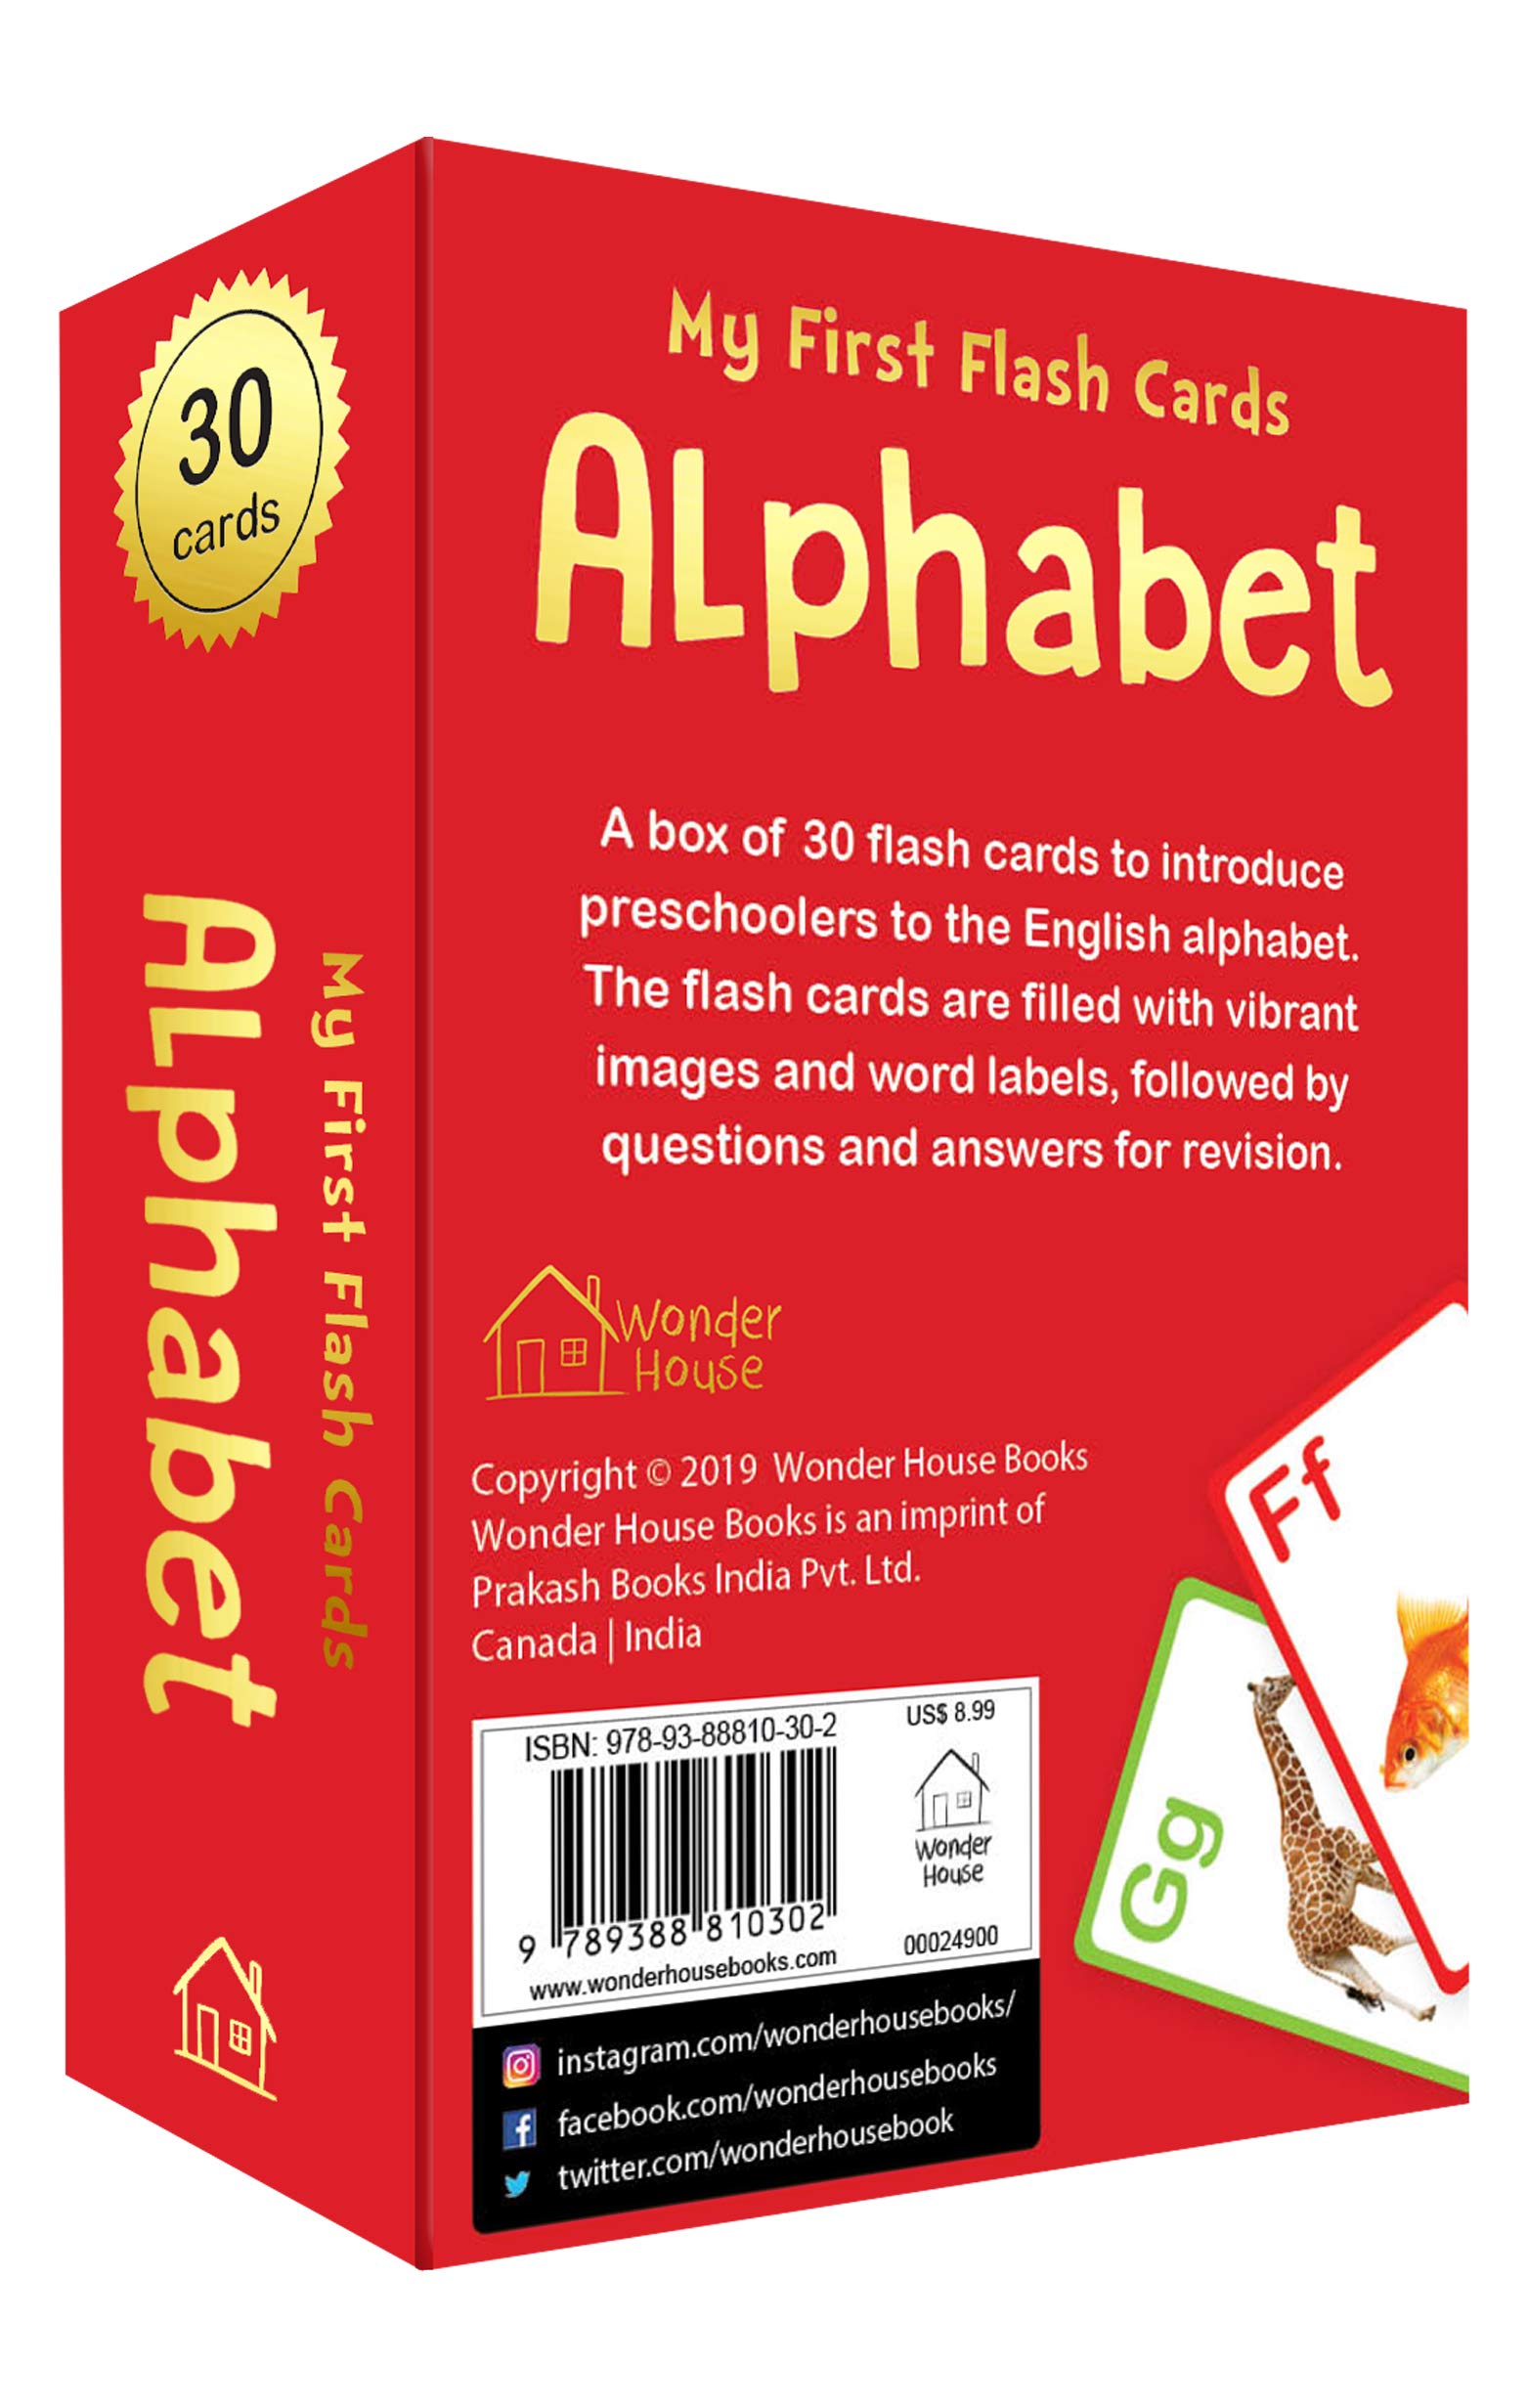 My First Flash Cards Alphabet: 30 Early Learning Flash Cards For Kids